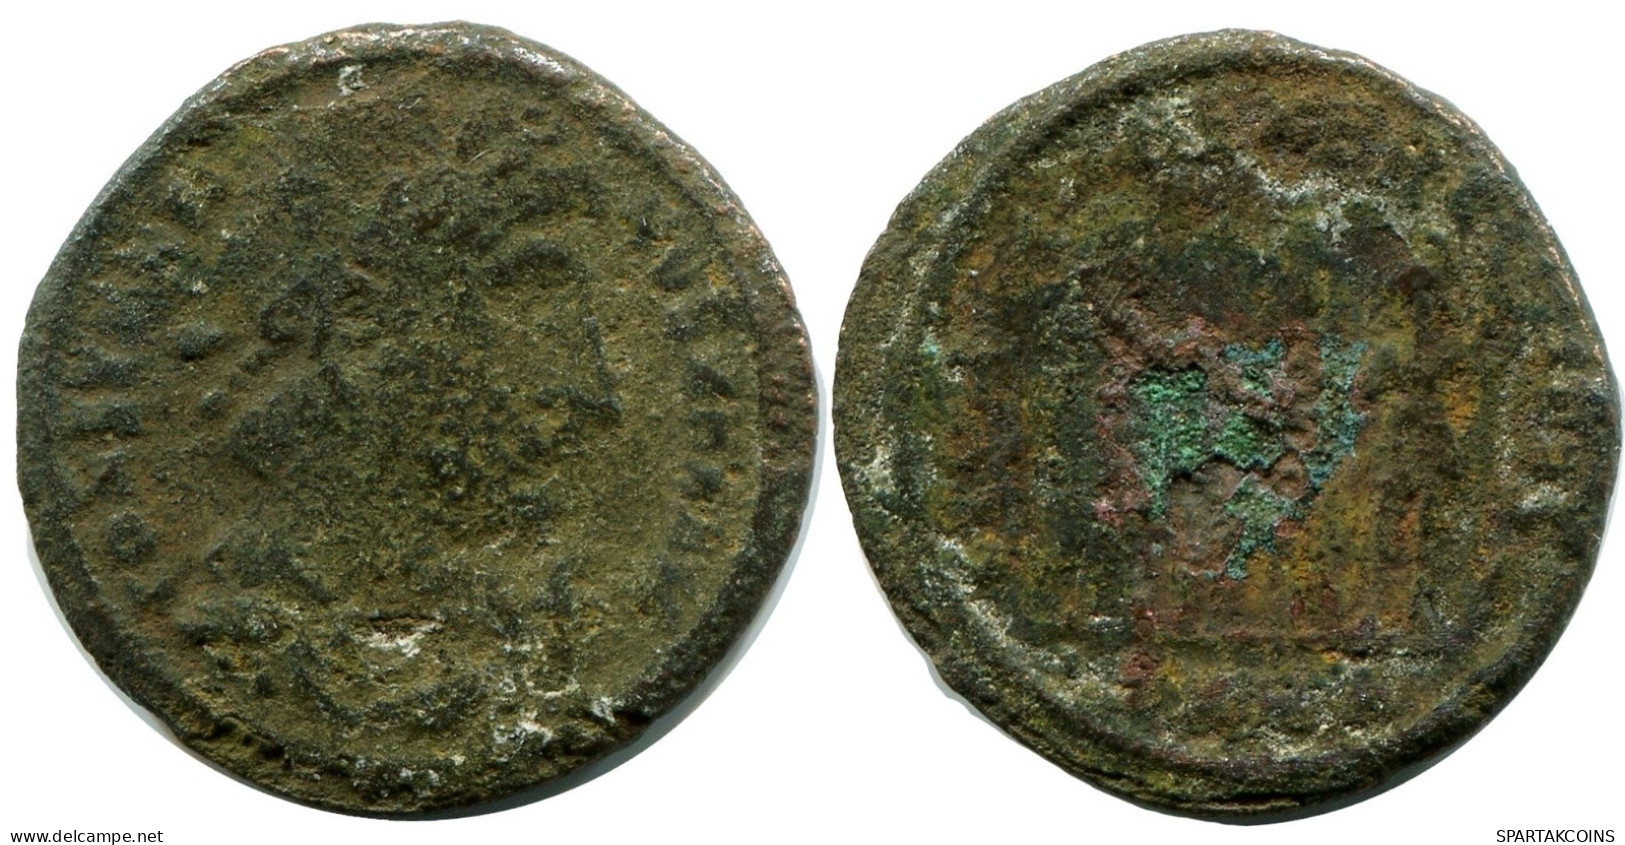 CONSTANTINE I MINTED IN HERACLEA FROM THE ROYAL ONTARIO MUSEUM #ANC11197.14.U.A - Der Christlischen Kaiser (307 / 363)